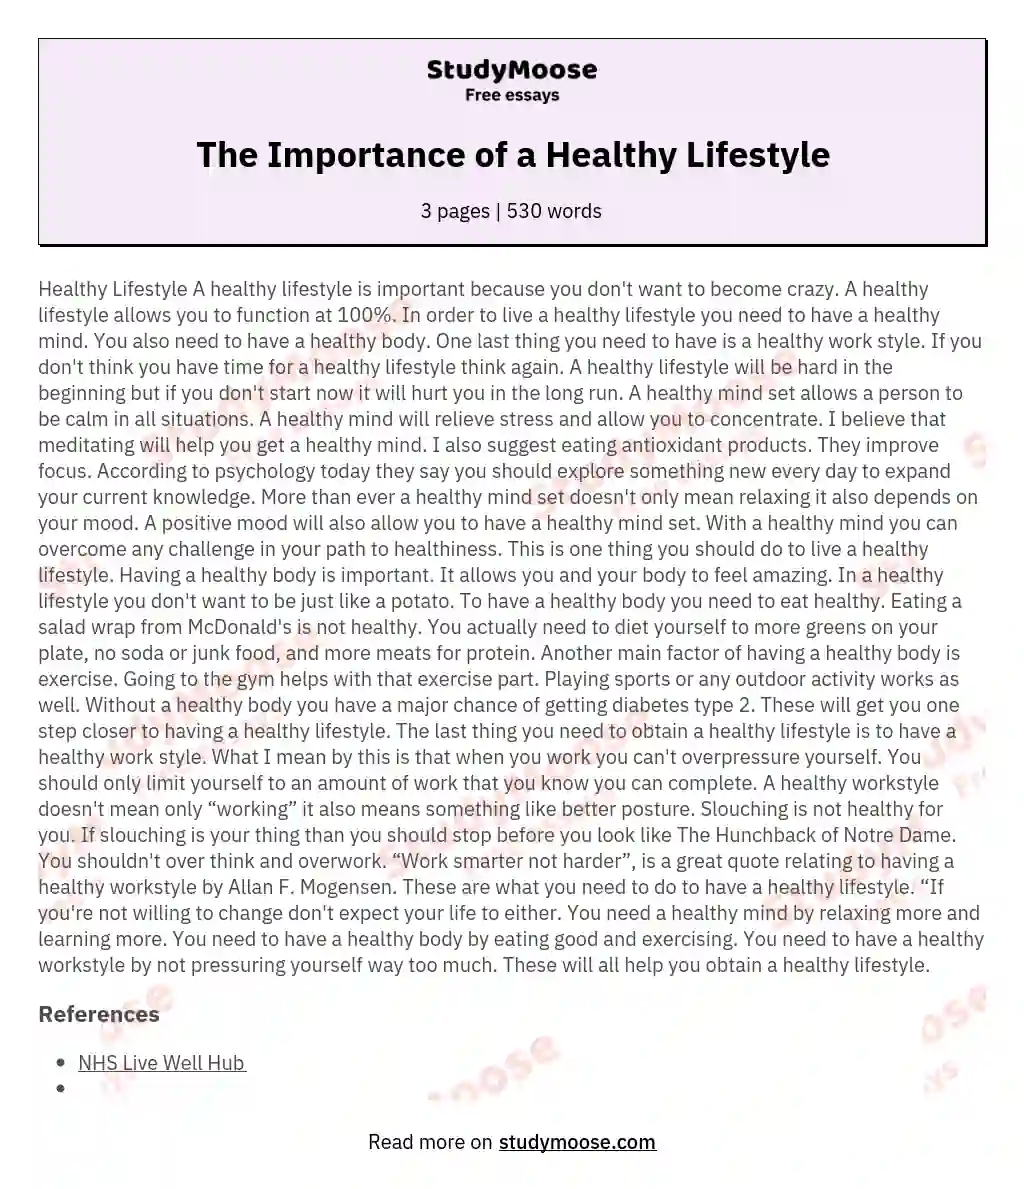 The Importance of a Healthy Lifestyle essay